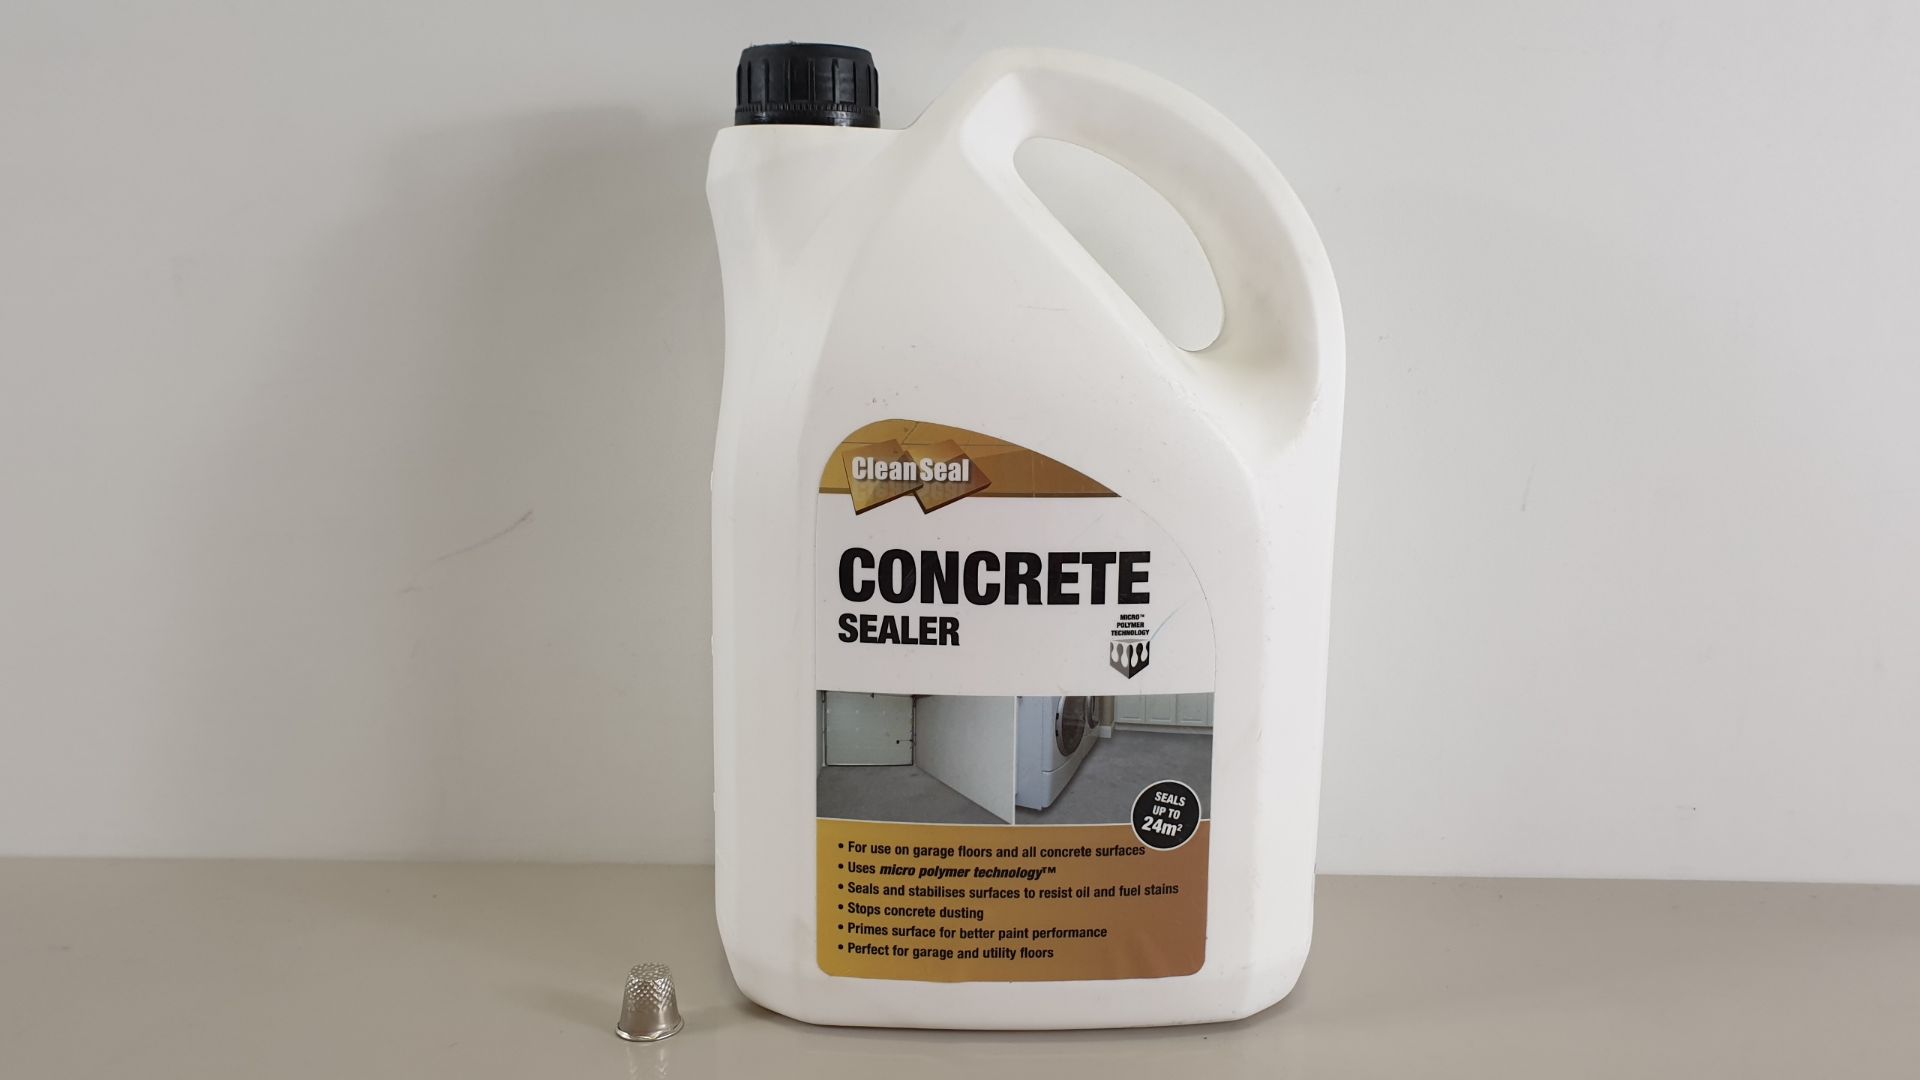 PALLET CONTAINING 144 X 4L CLEANSEAL CONCRETE SEALER WHICH USES MICRO POLYMER TECHNOLOGY